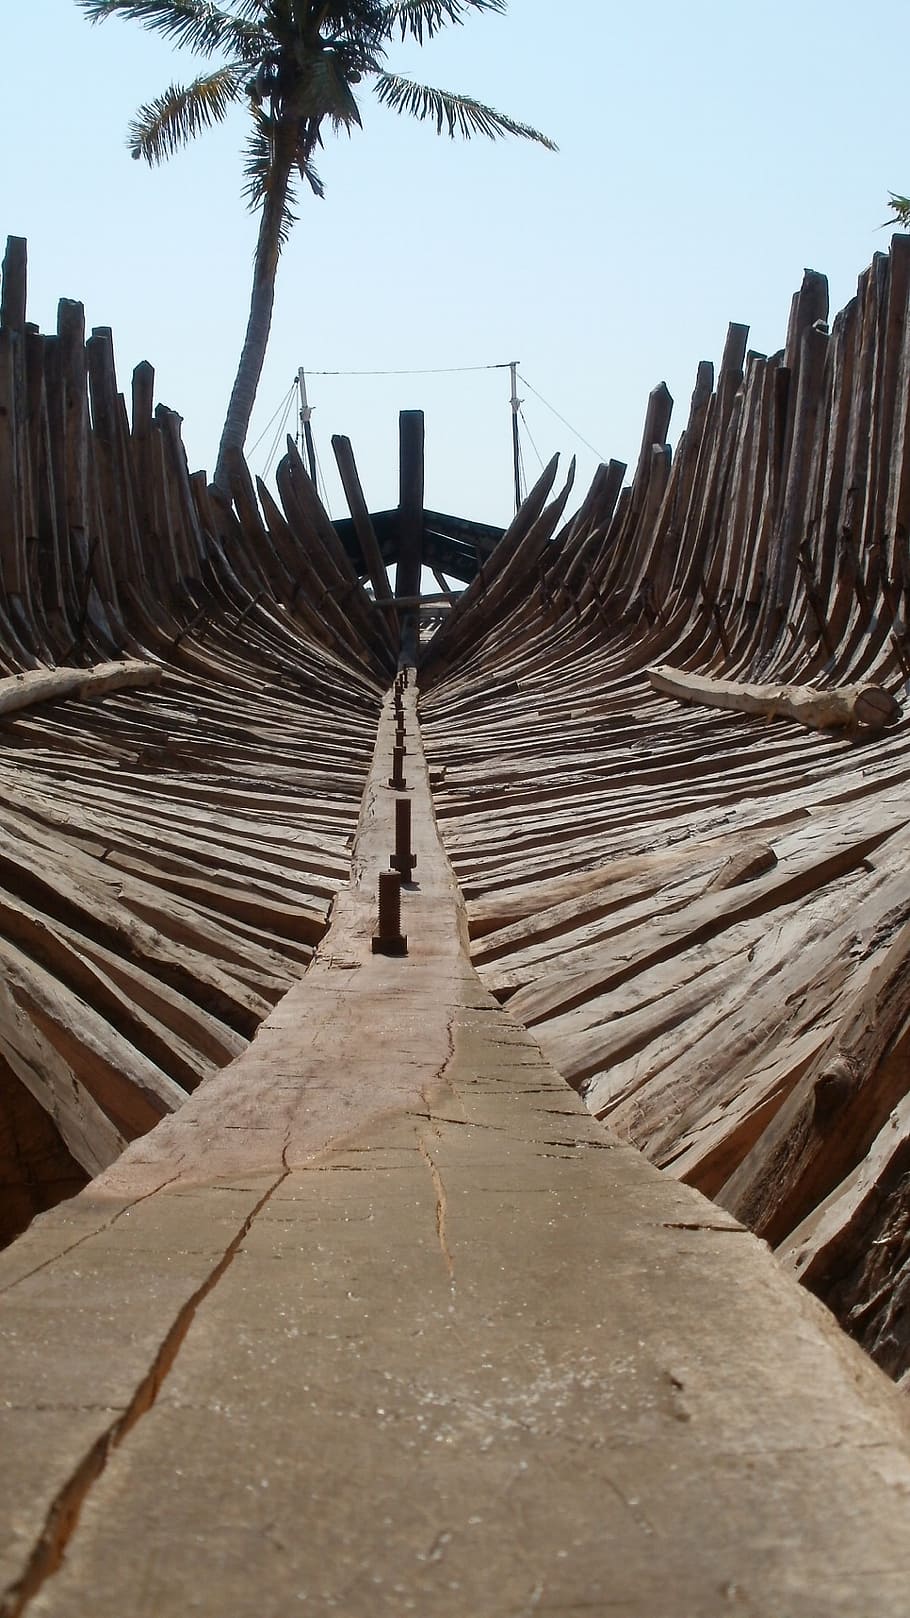 dhow building, belo sea, madagascar, wood, old, carcass, sky, direction, architecture, the way forward